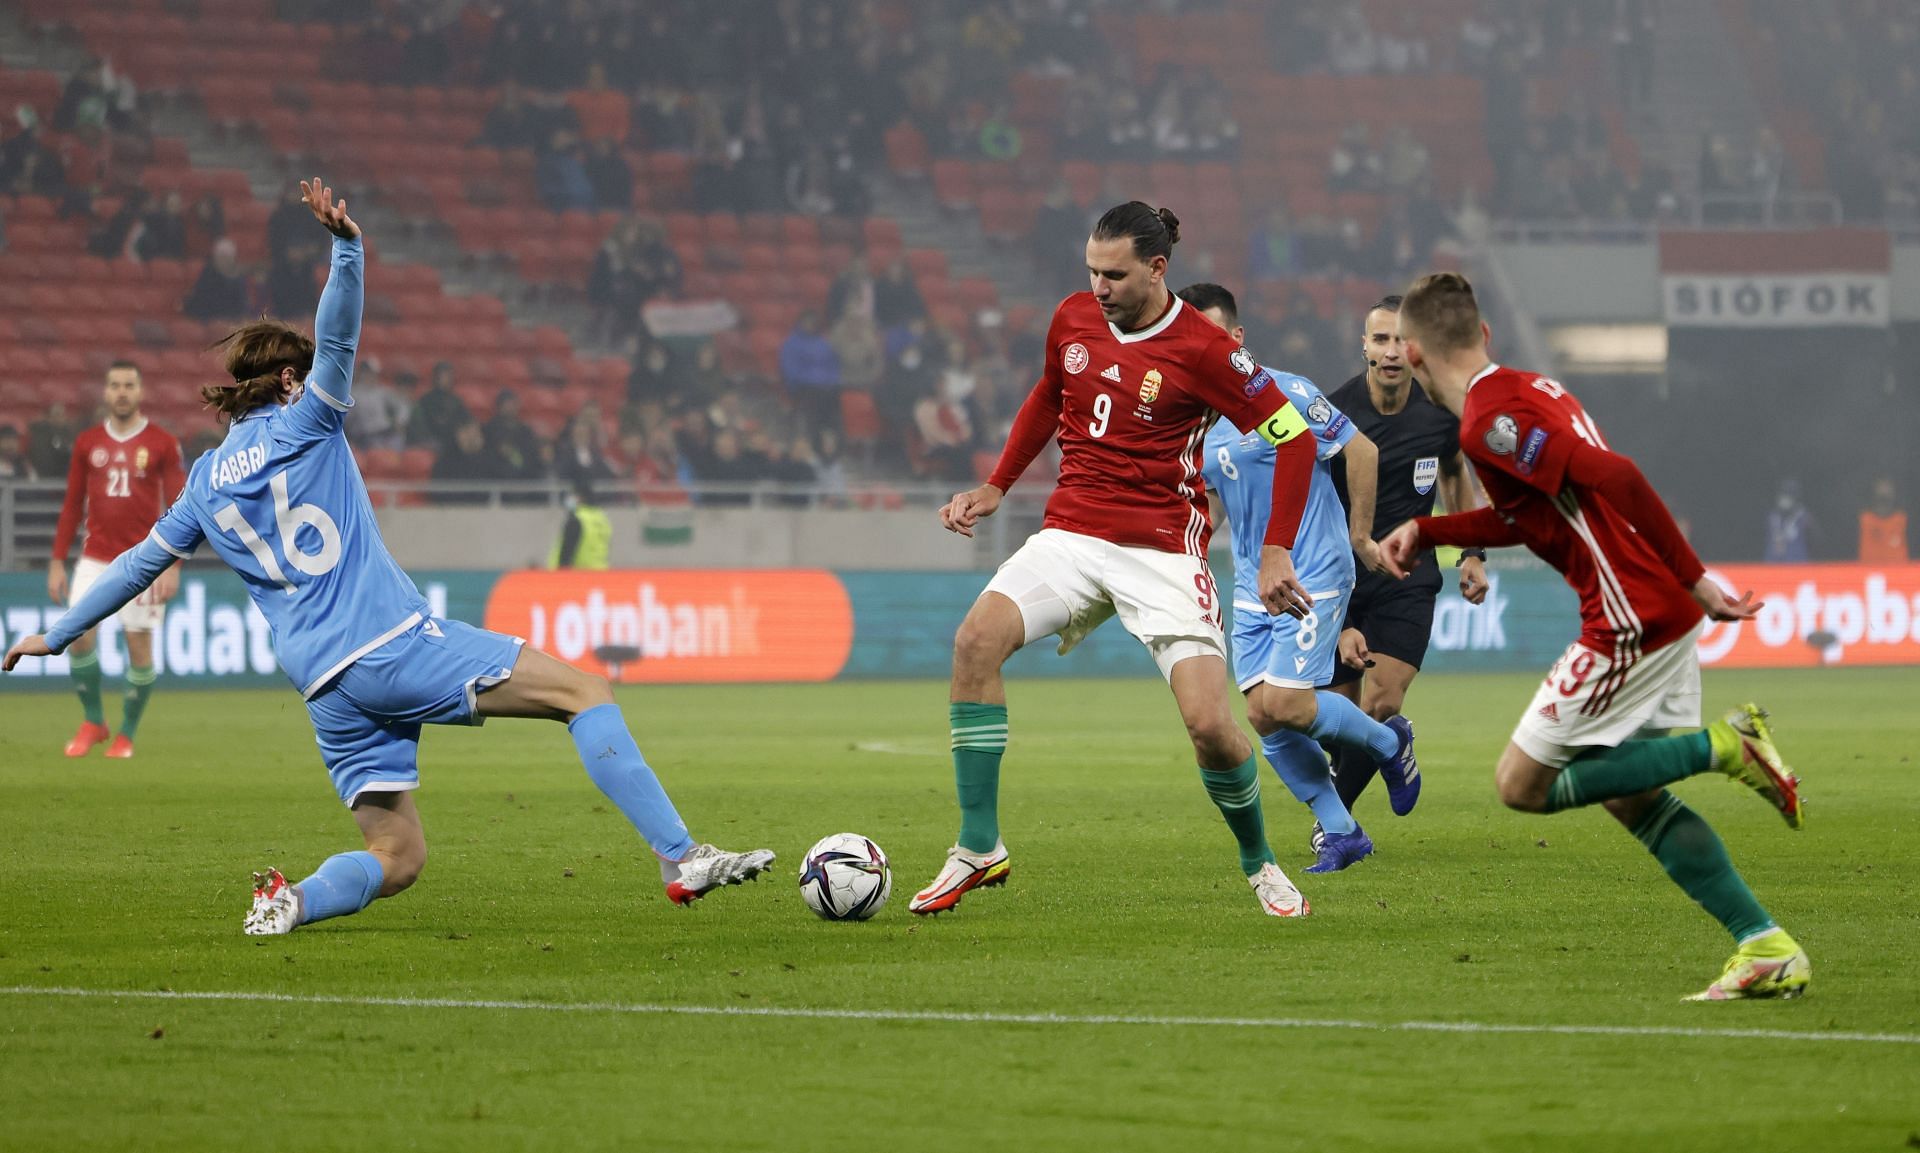 Hungary want to make it two wins from two